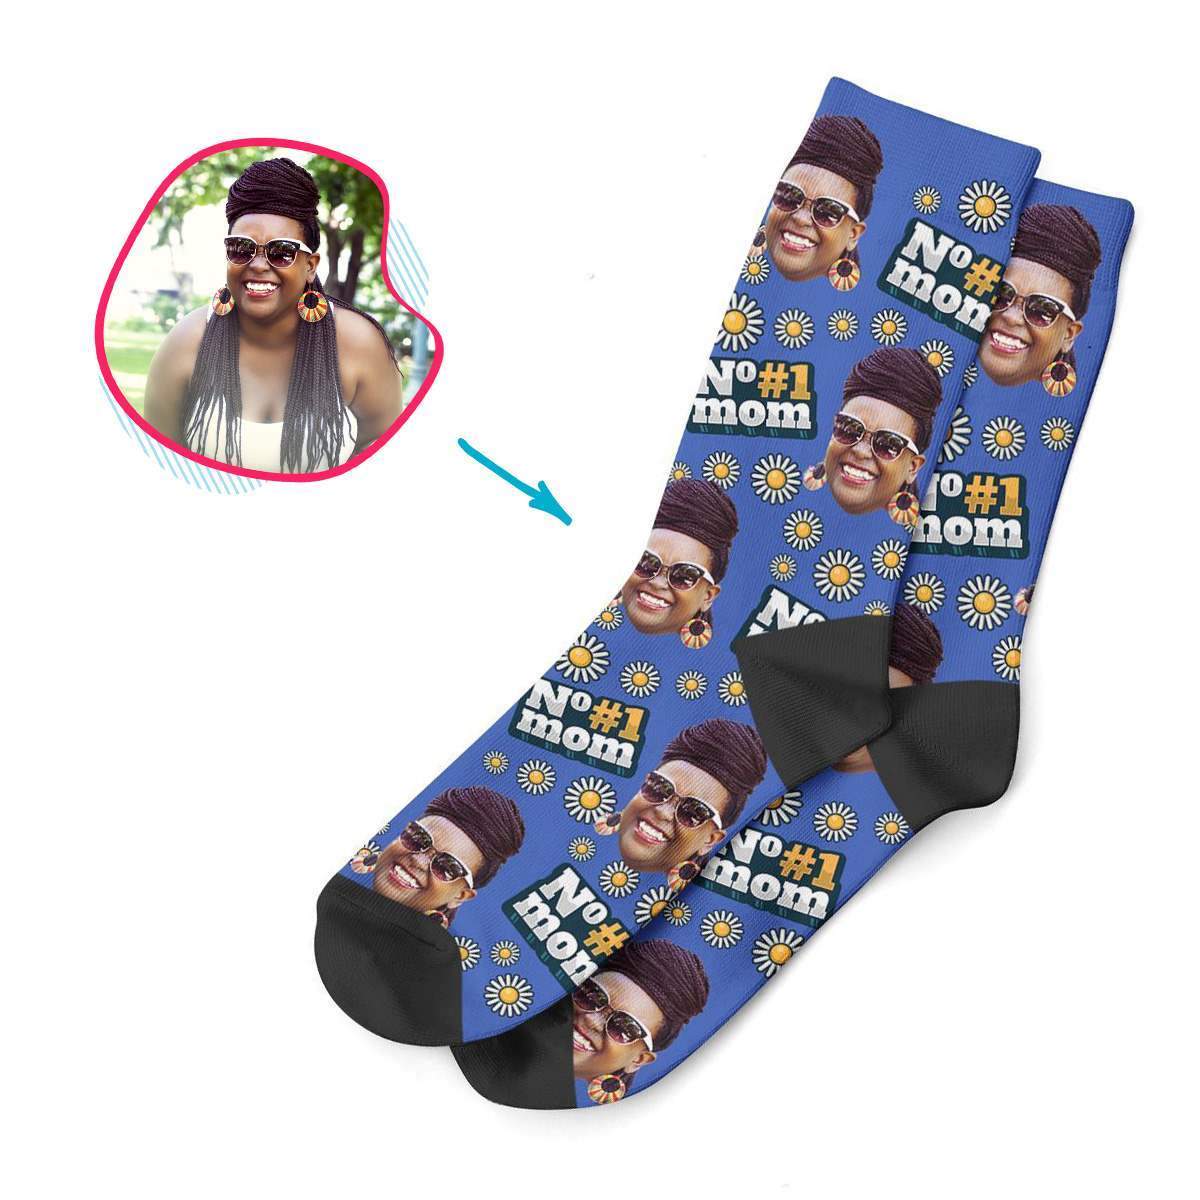 darkblue #1 Mom socks personalized with photo of face printed on them